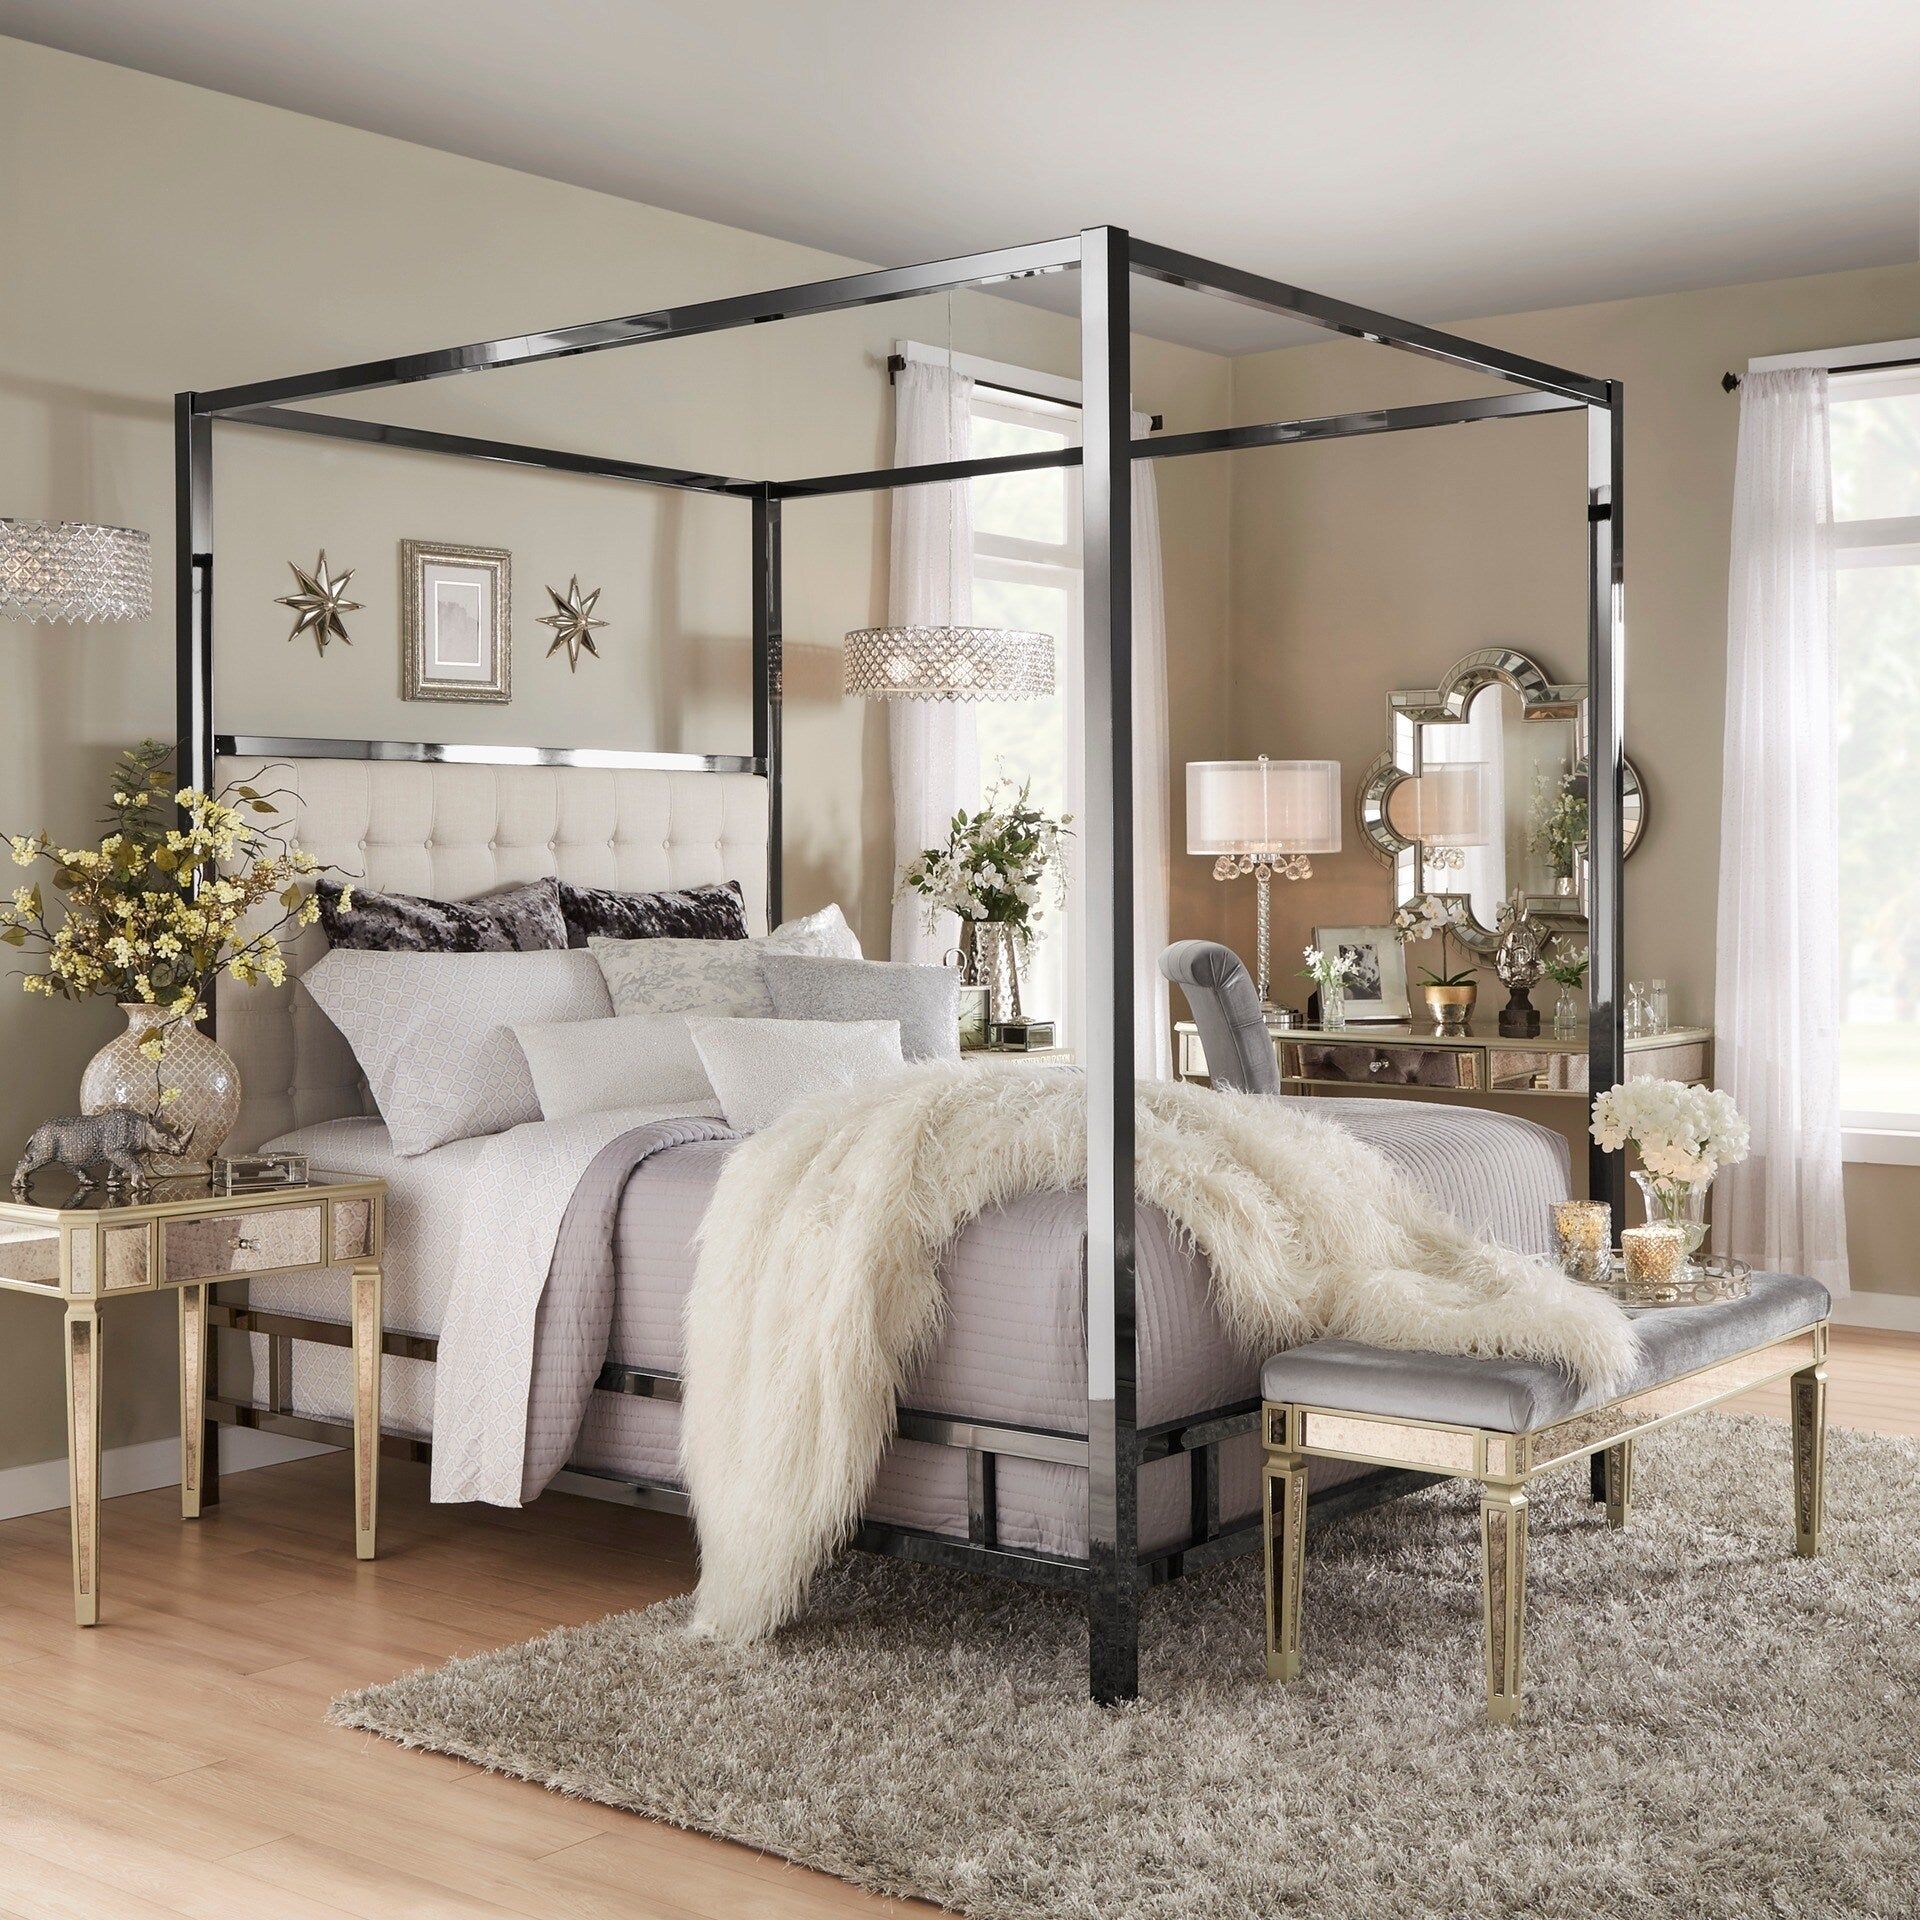 Embrace Luxury: The Timeless Elegance of Canopy Beds with Upholstered Headboards